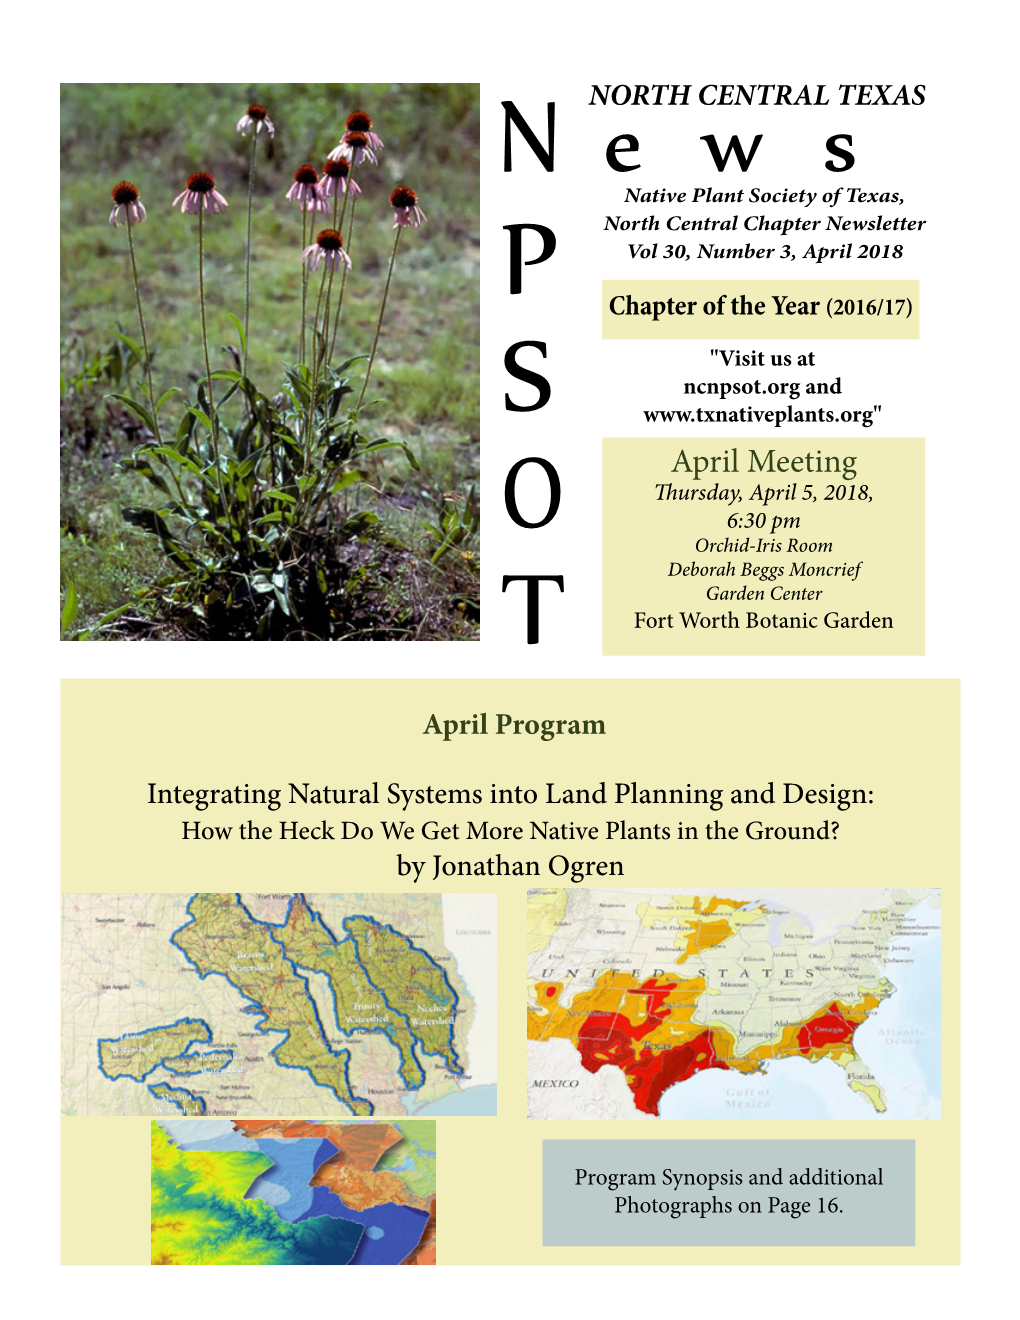 N Northe Centralw S TEXAS Native Plant Society of Texas, North Central Chapter Newsletter Vol 30, Number 3, April 2018